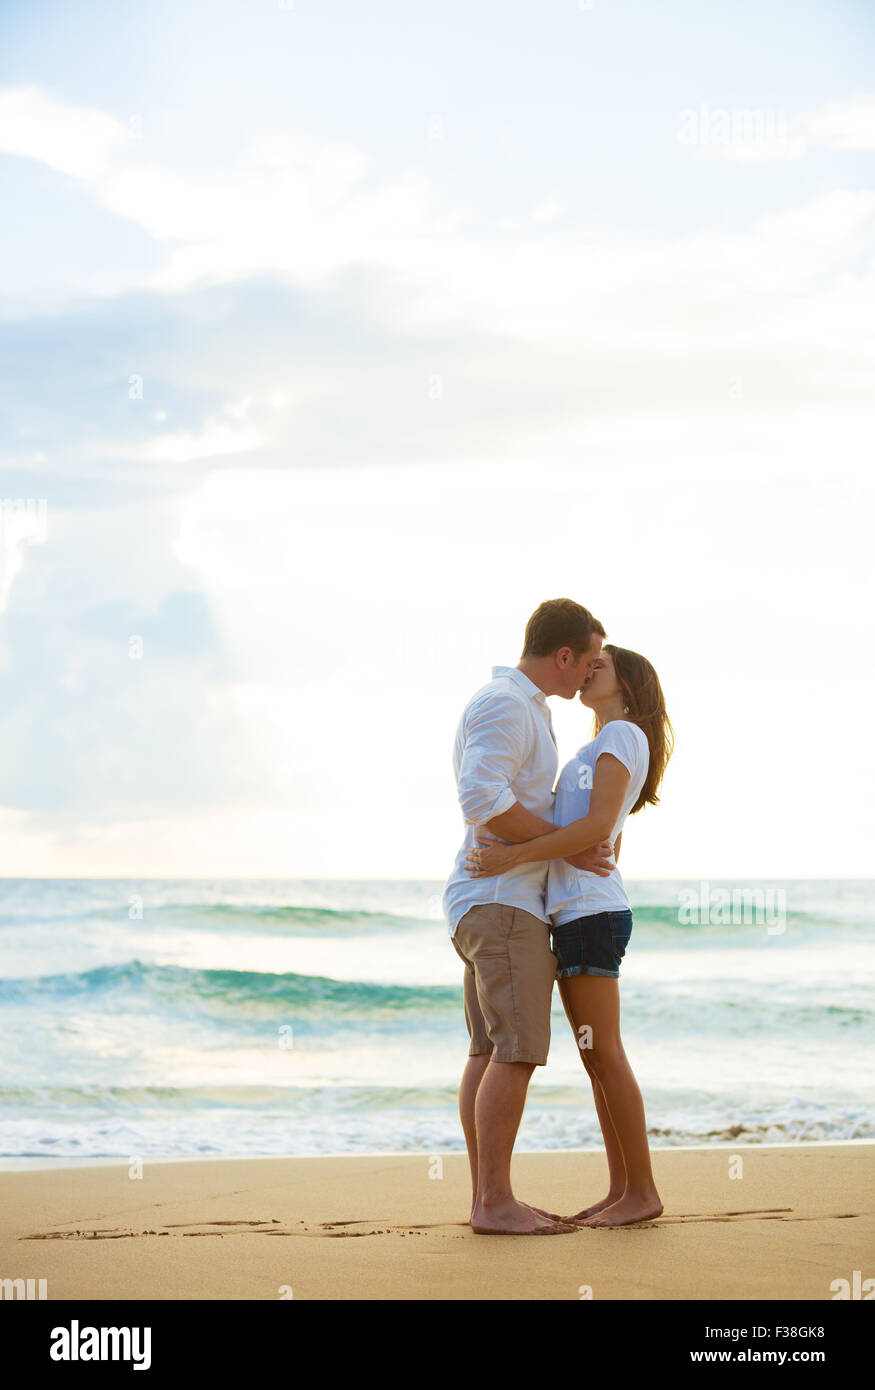 Romantic Happy Young Couple Kissing on the Beach at Sunset Stock Photo